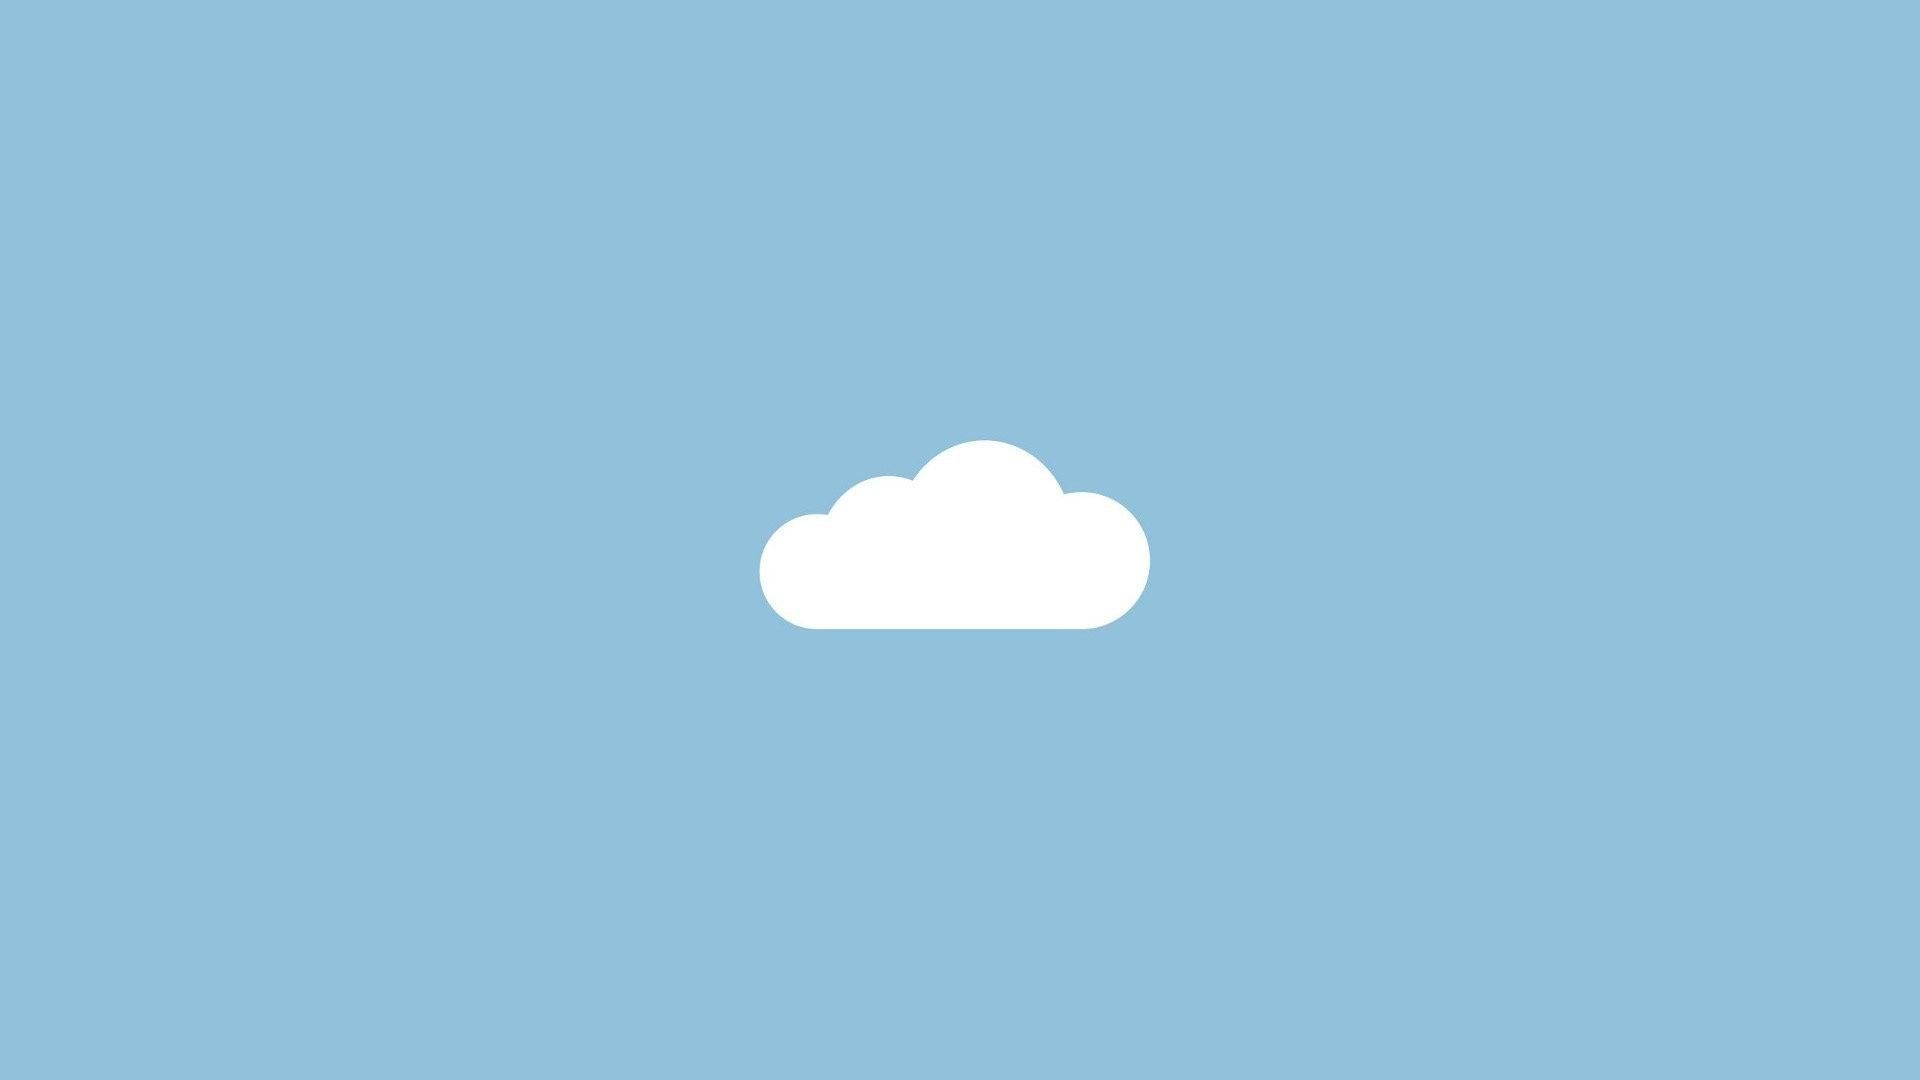 A white cloud on top of blue sky - Pastel blue